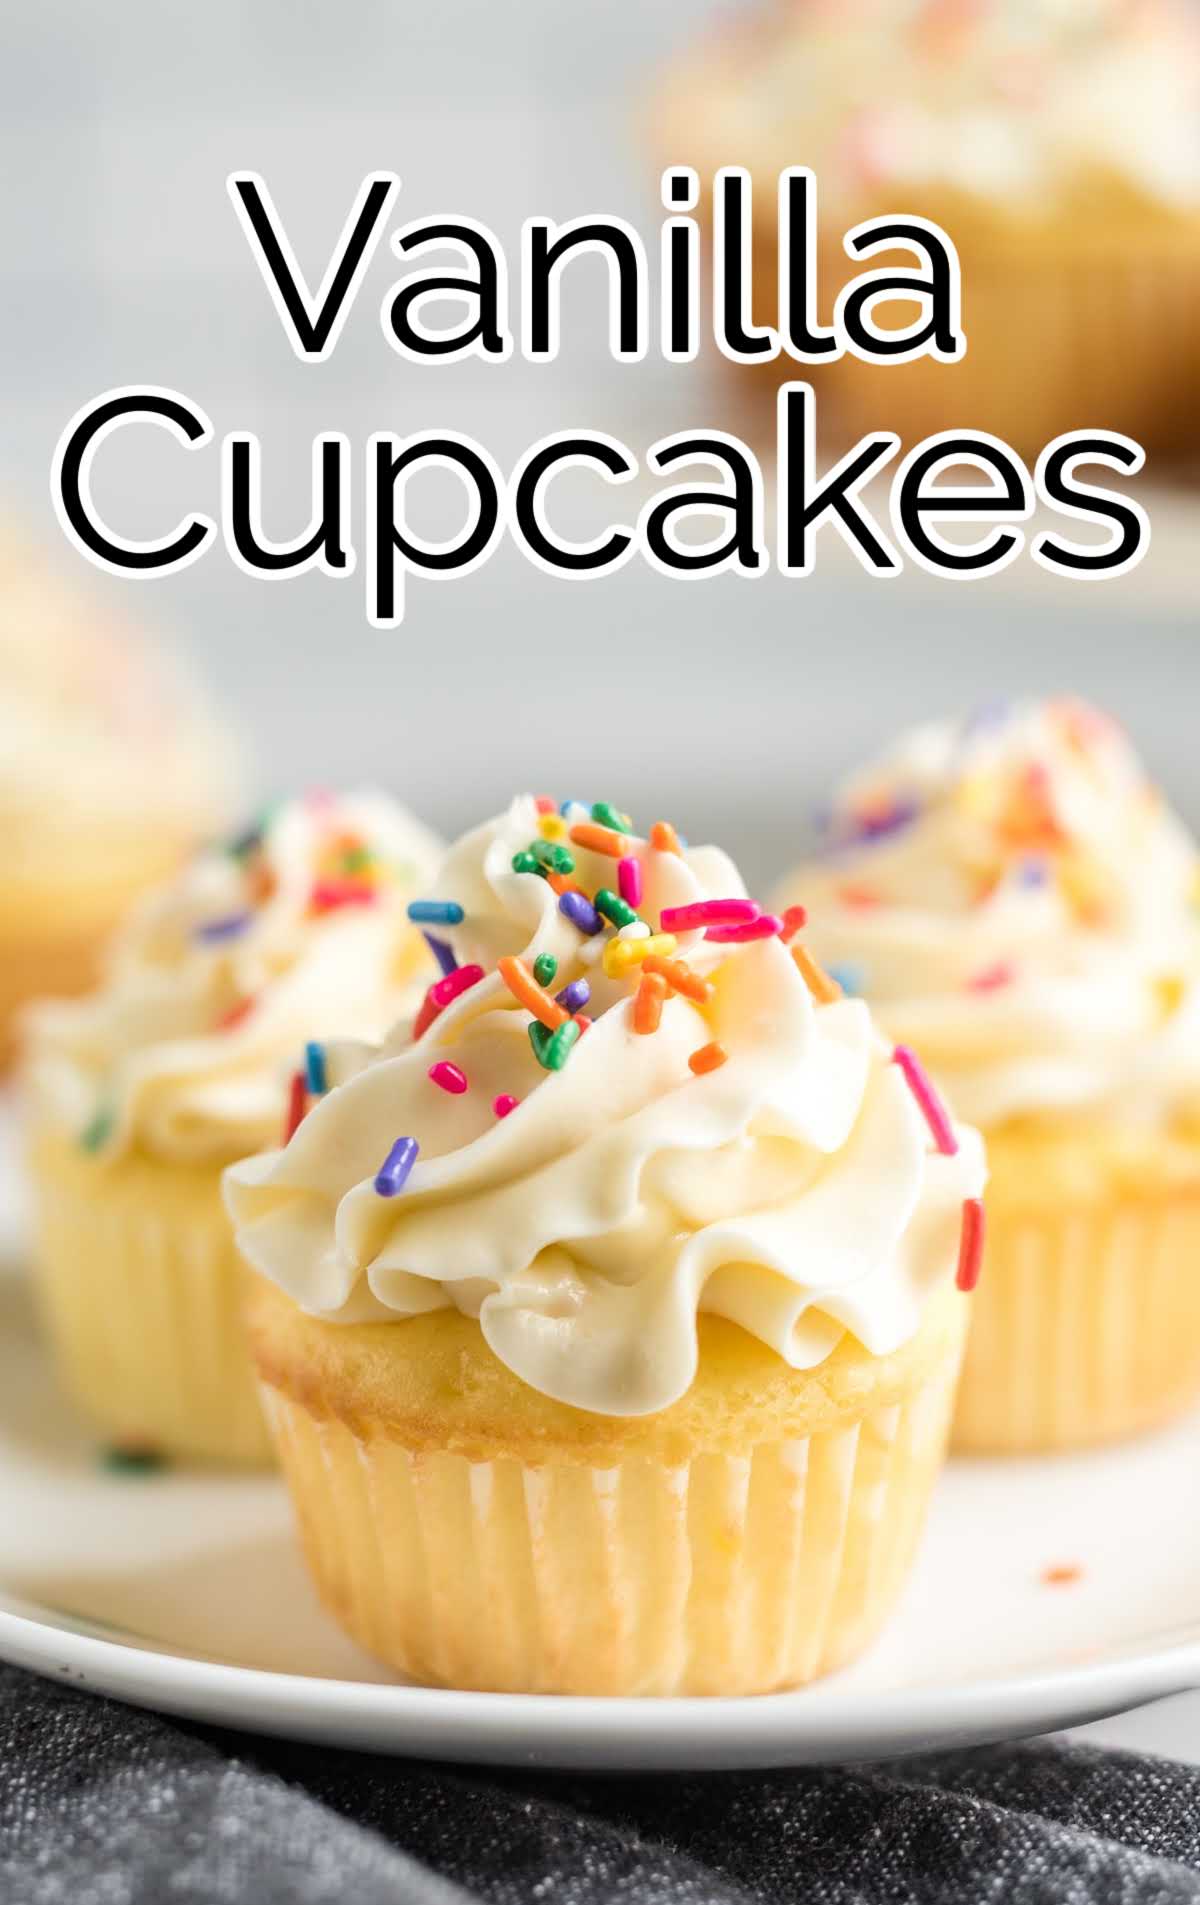 Vanilla Cupcakes topped with sprinkles on a plate